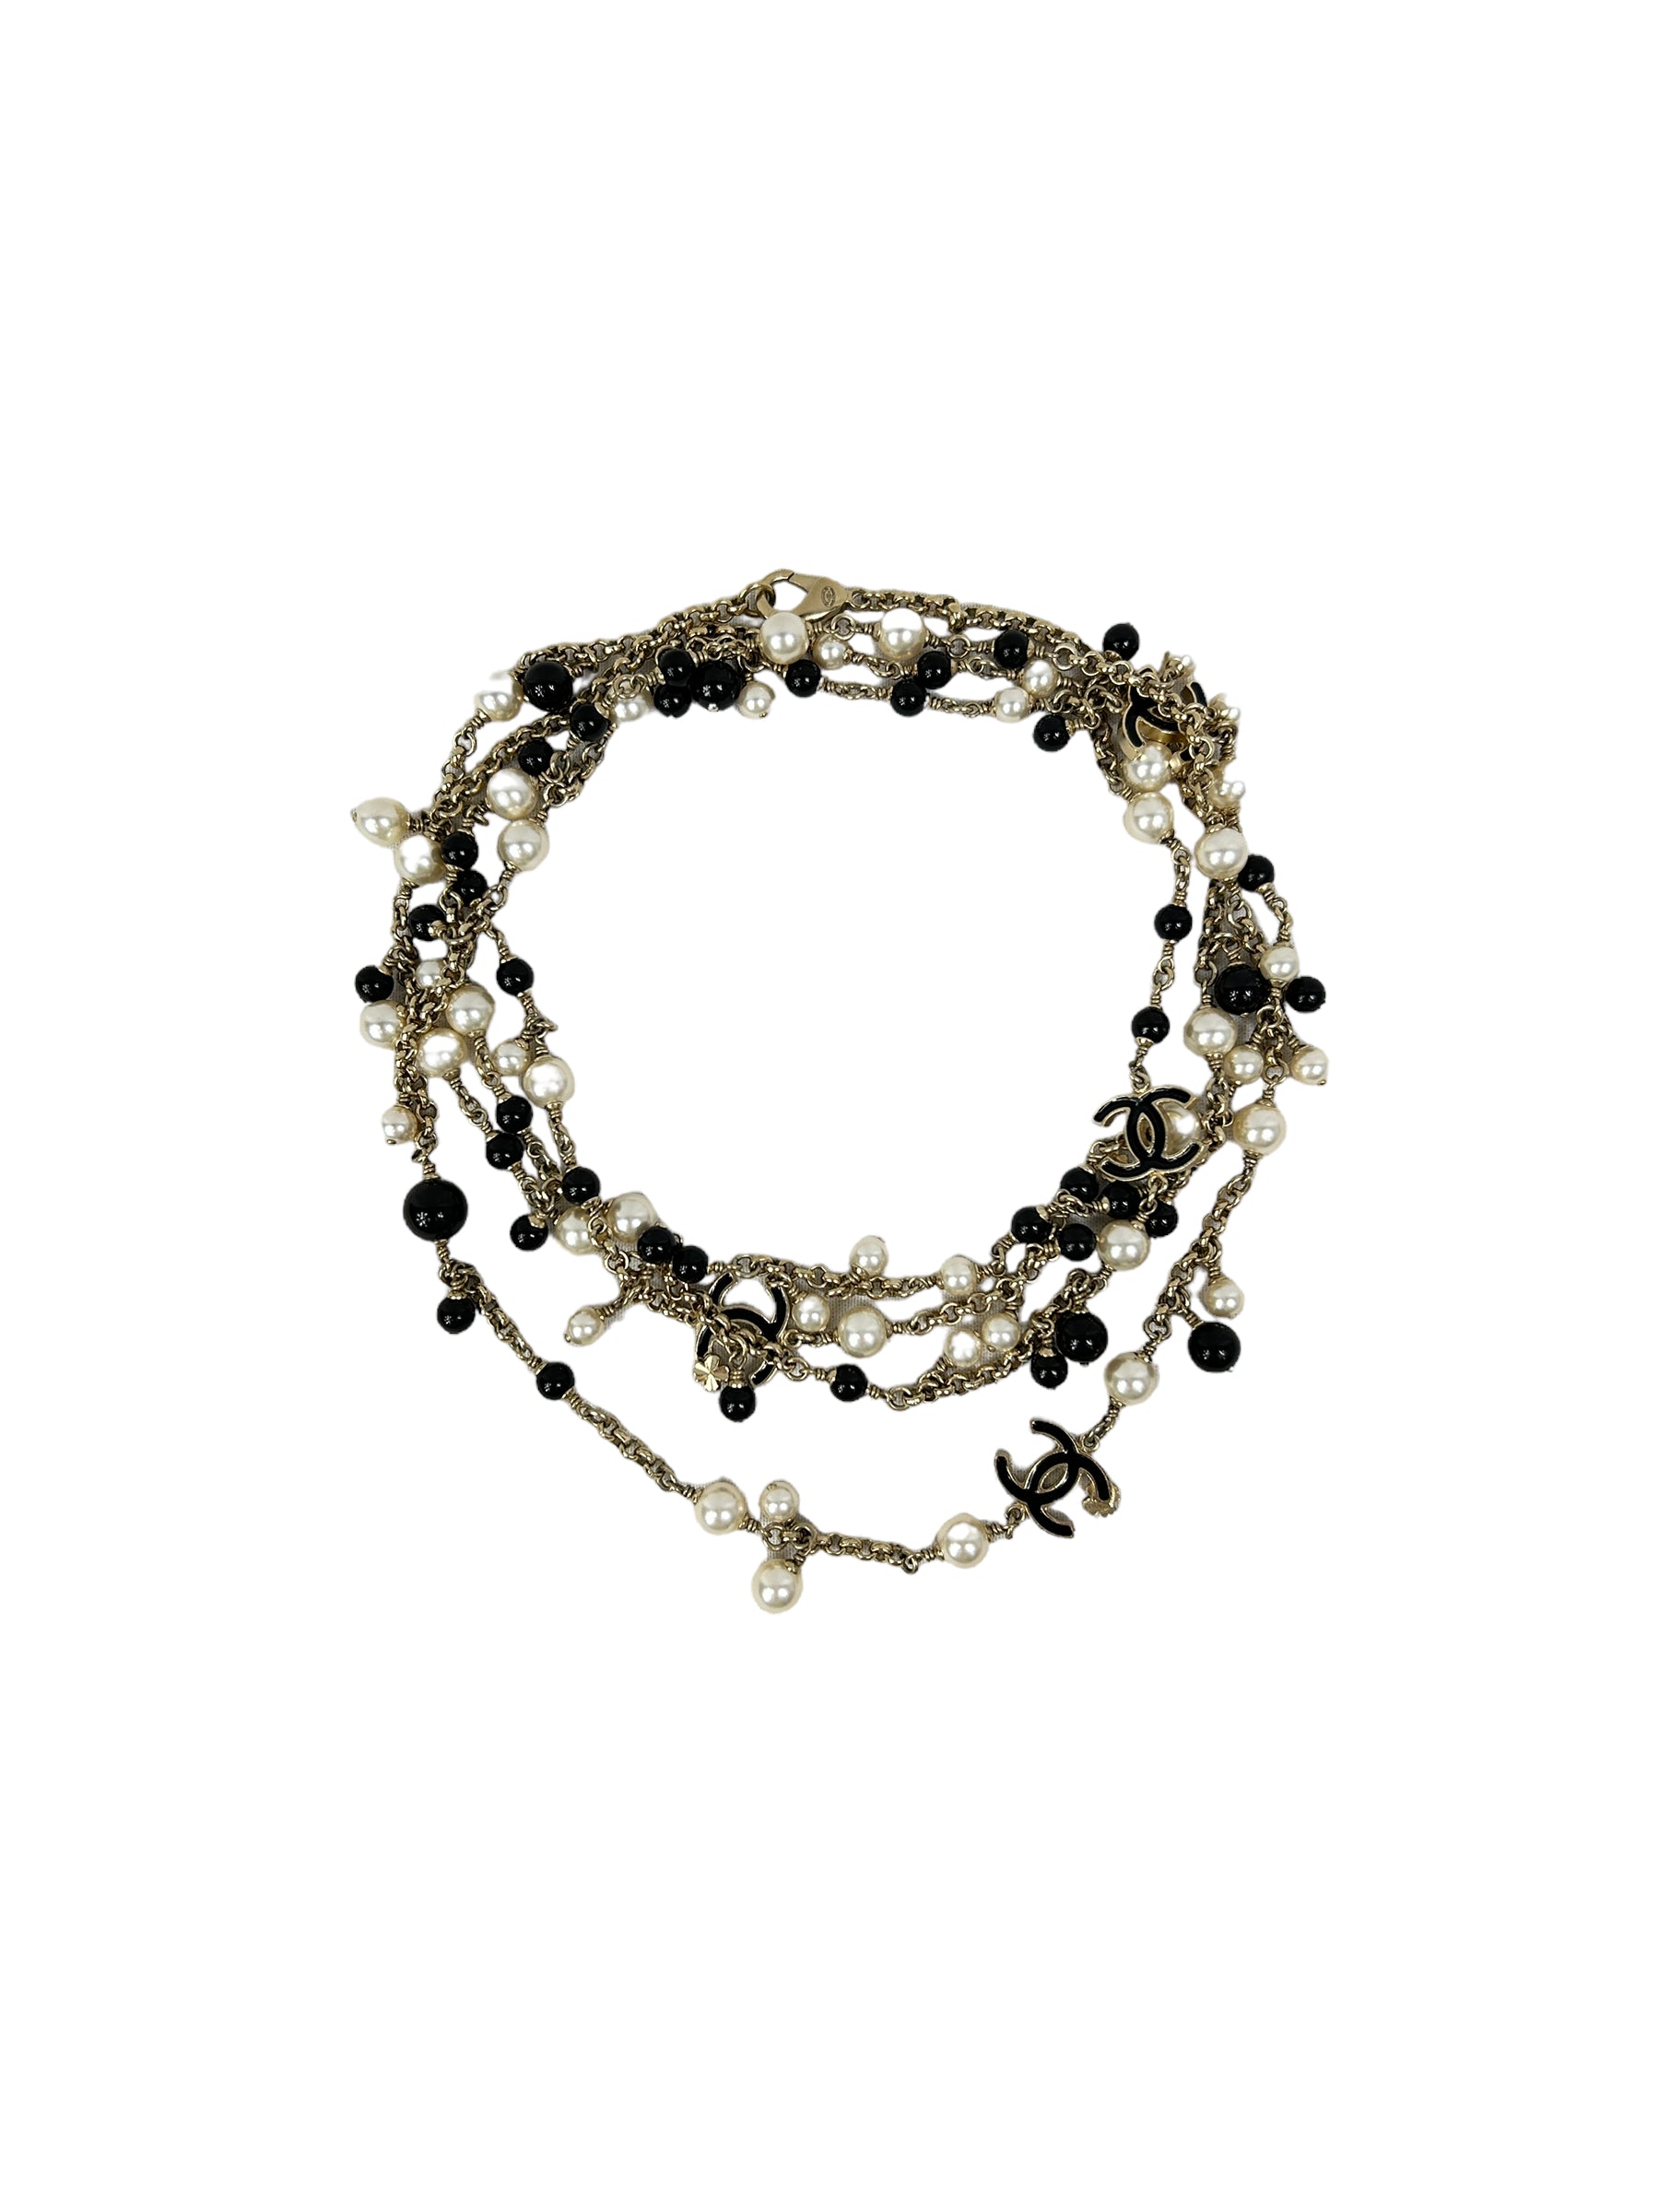 Costume Pearl/Black Enamel and CC Clover Gold Necklace